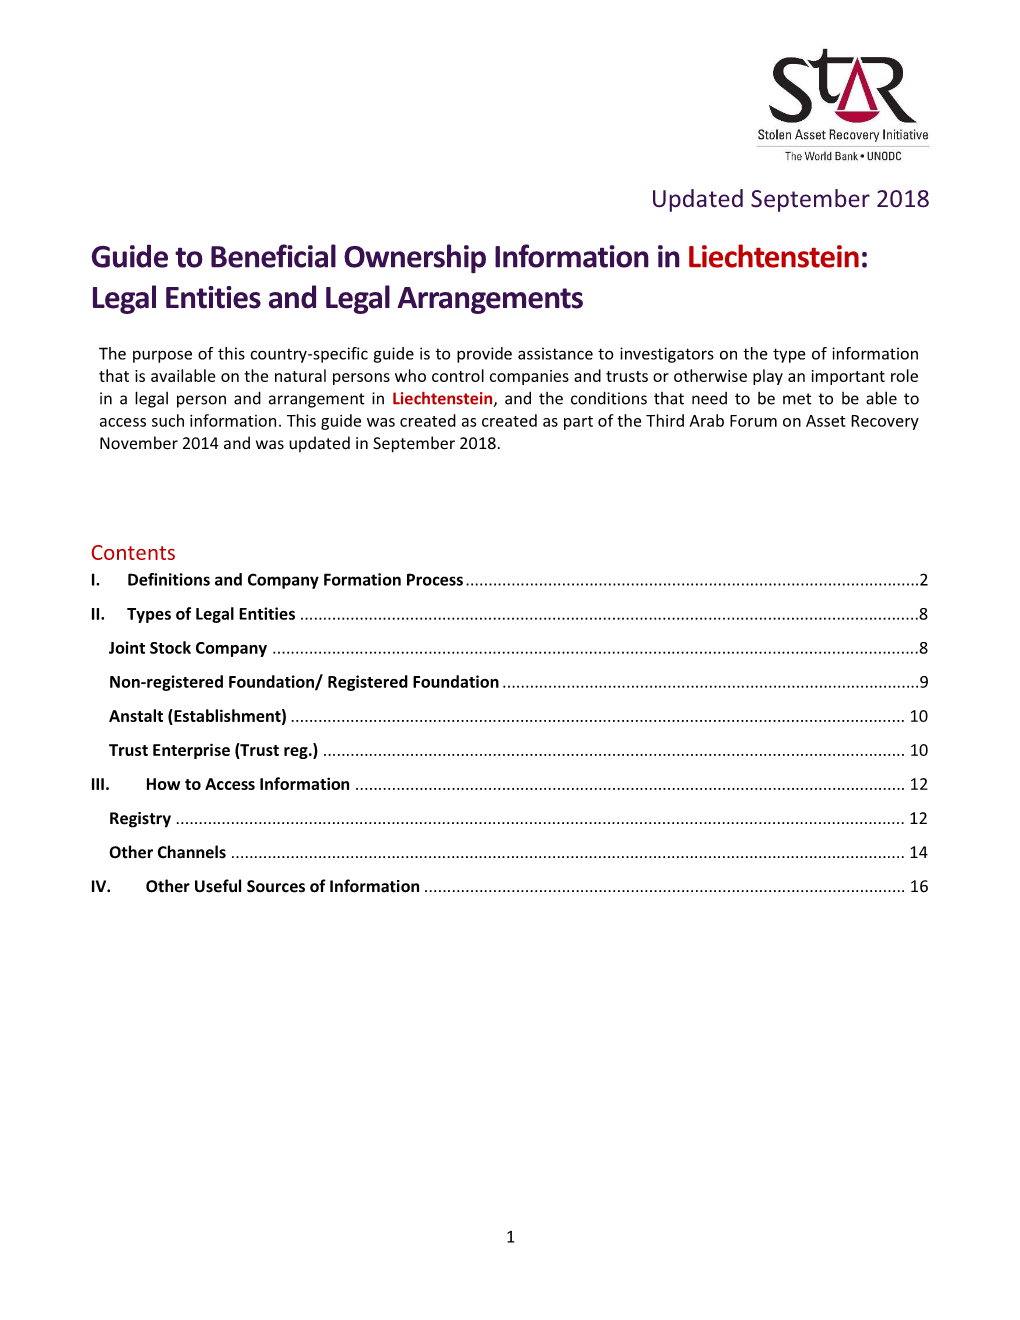 Guide to Beneficial Ownership Information in Liechtenstein: Legal Entities and Legal Arrangements